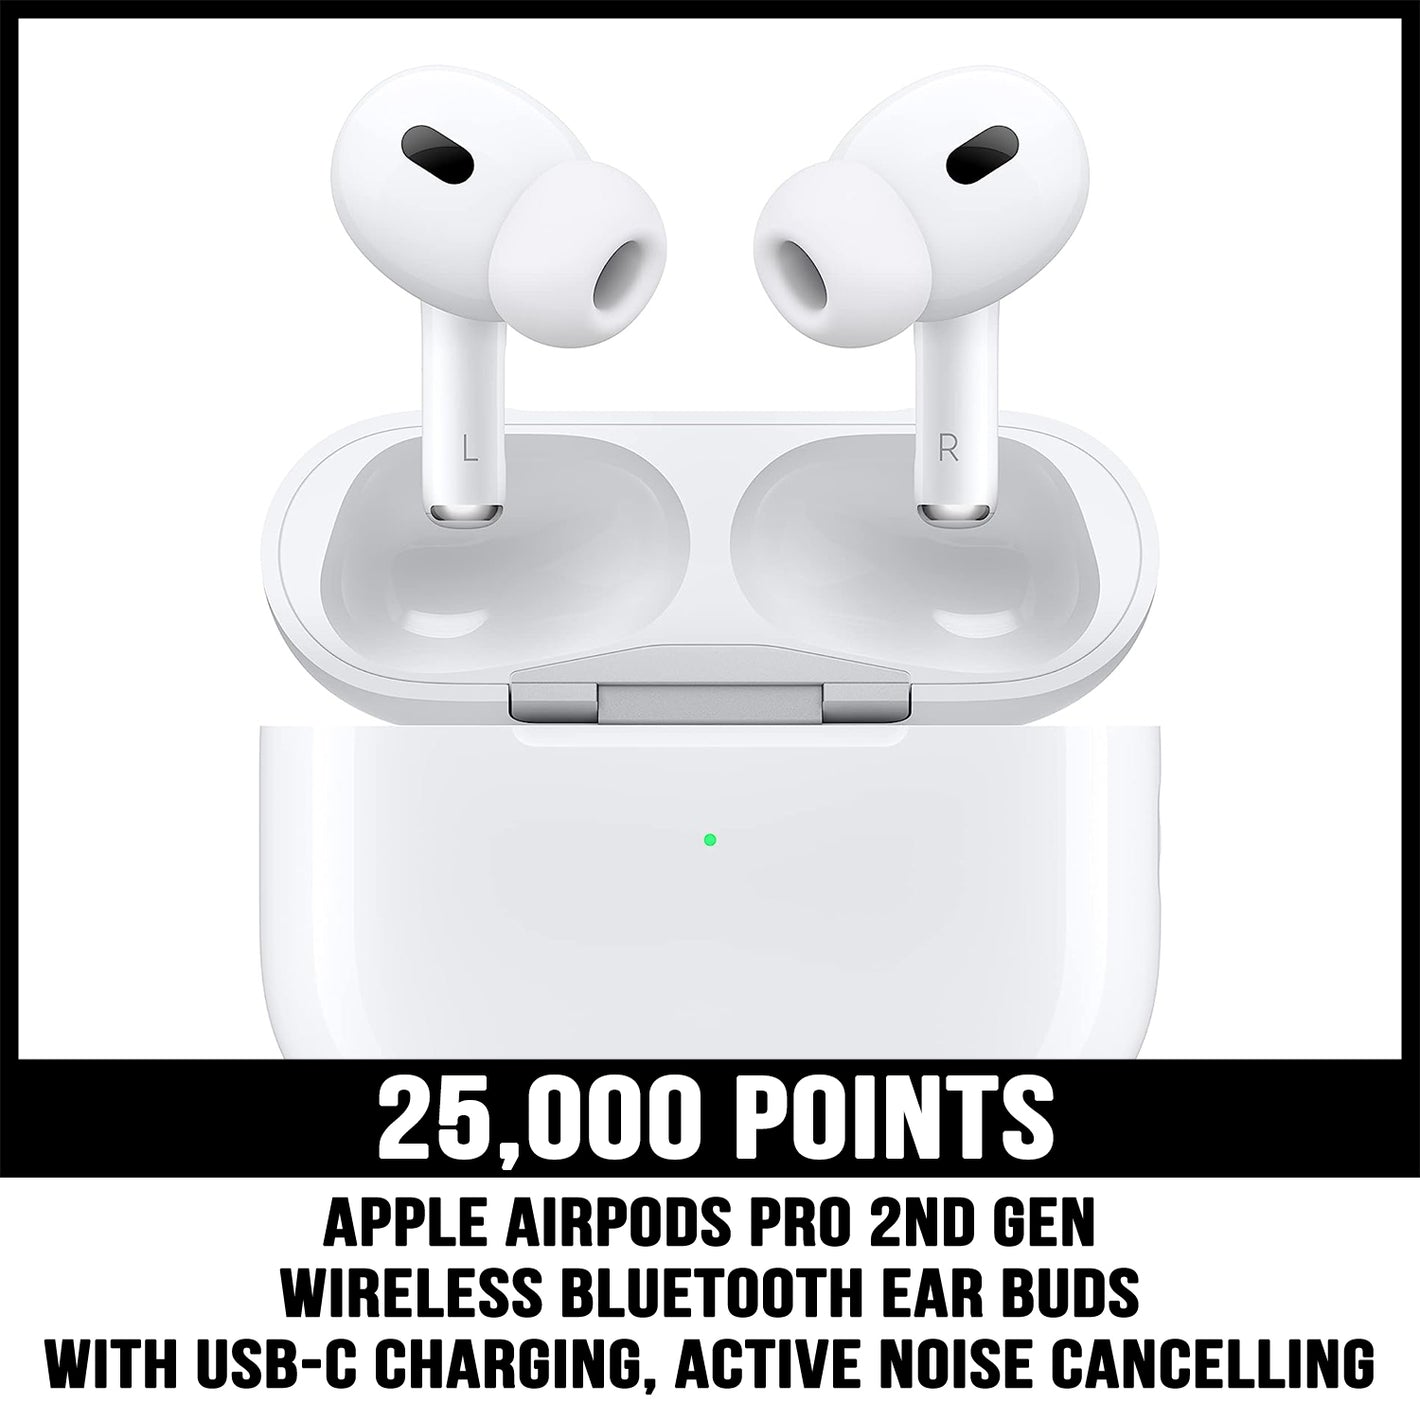 Apple AirPods Pro second generation prize for 25000 points